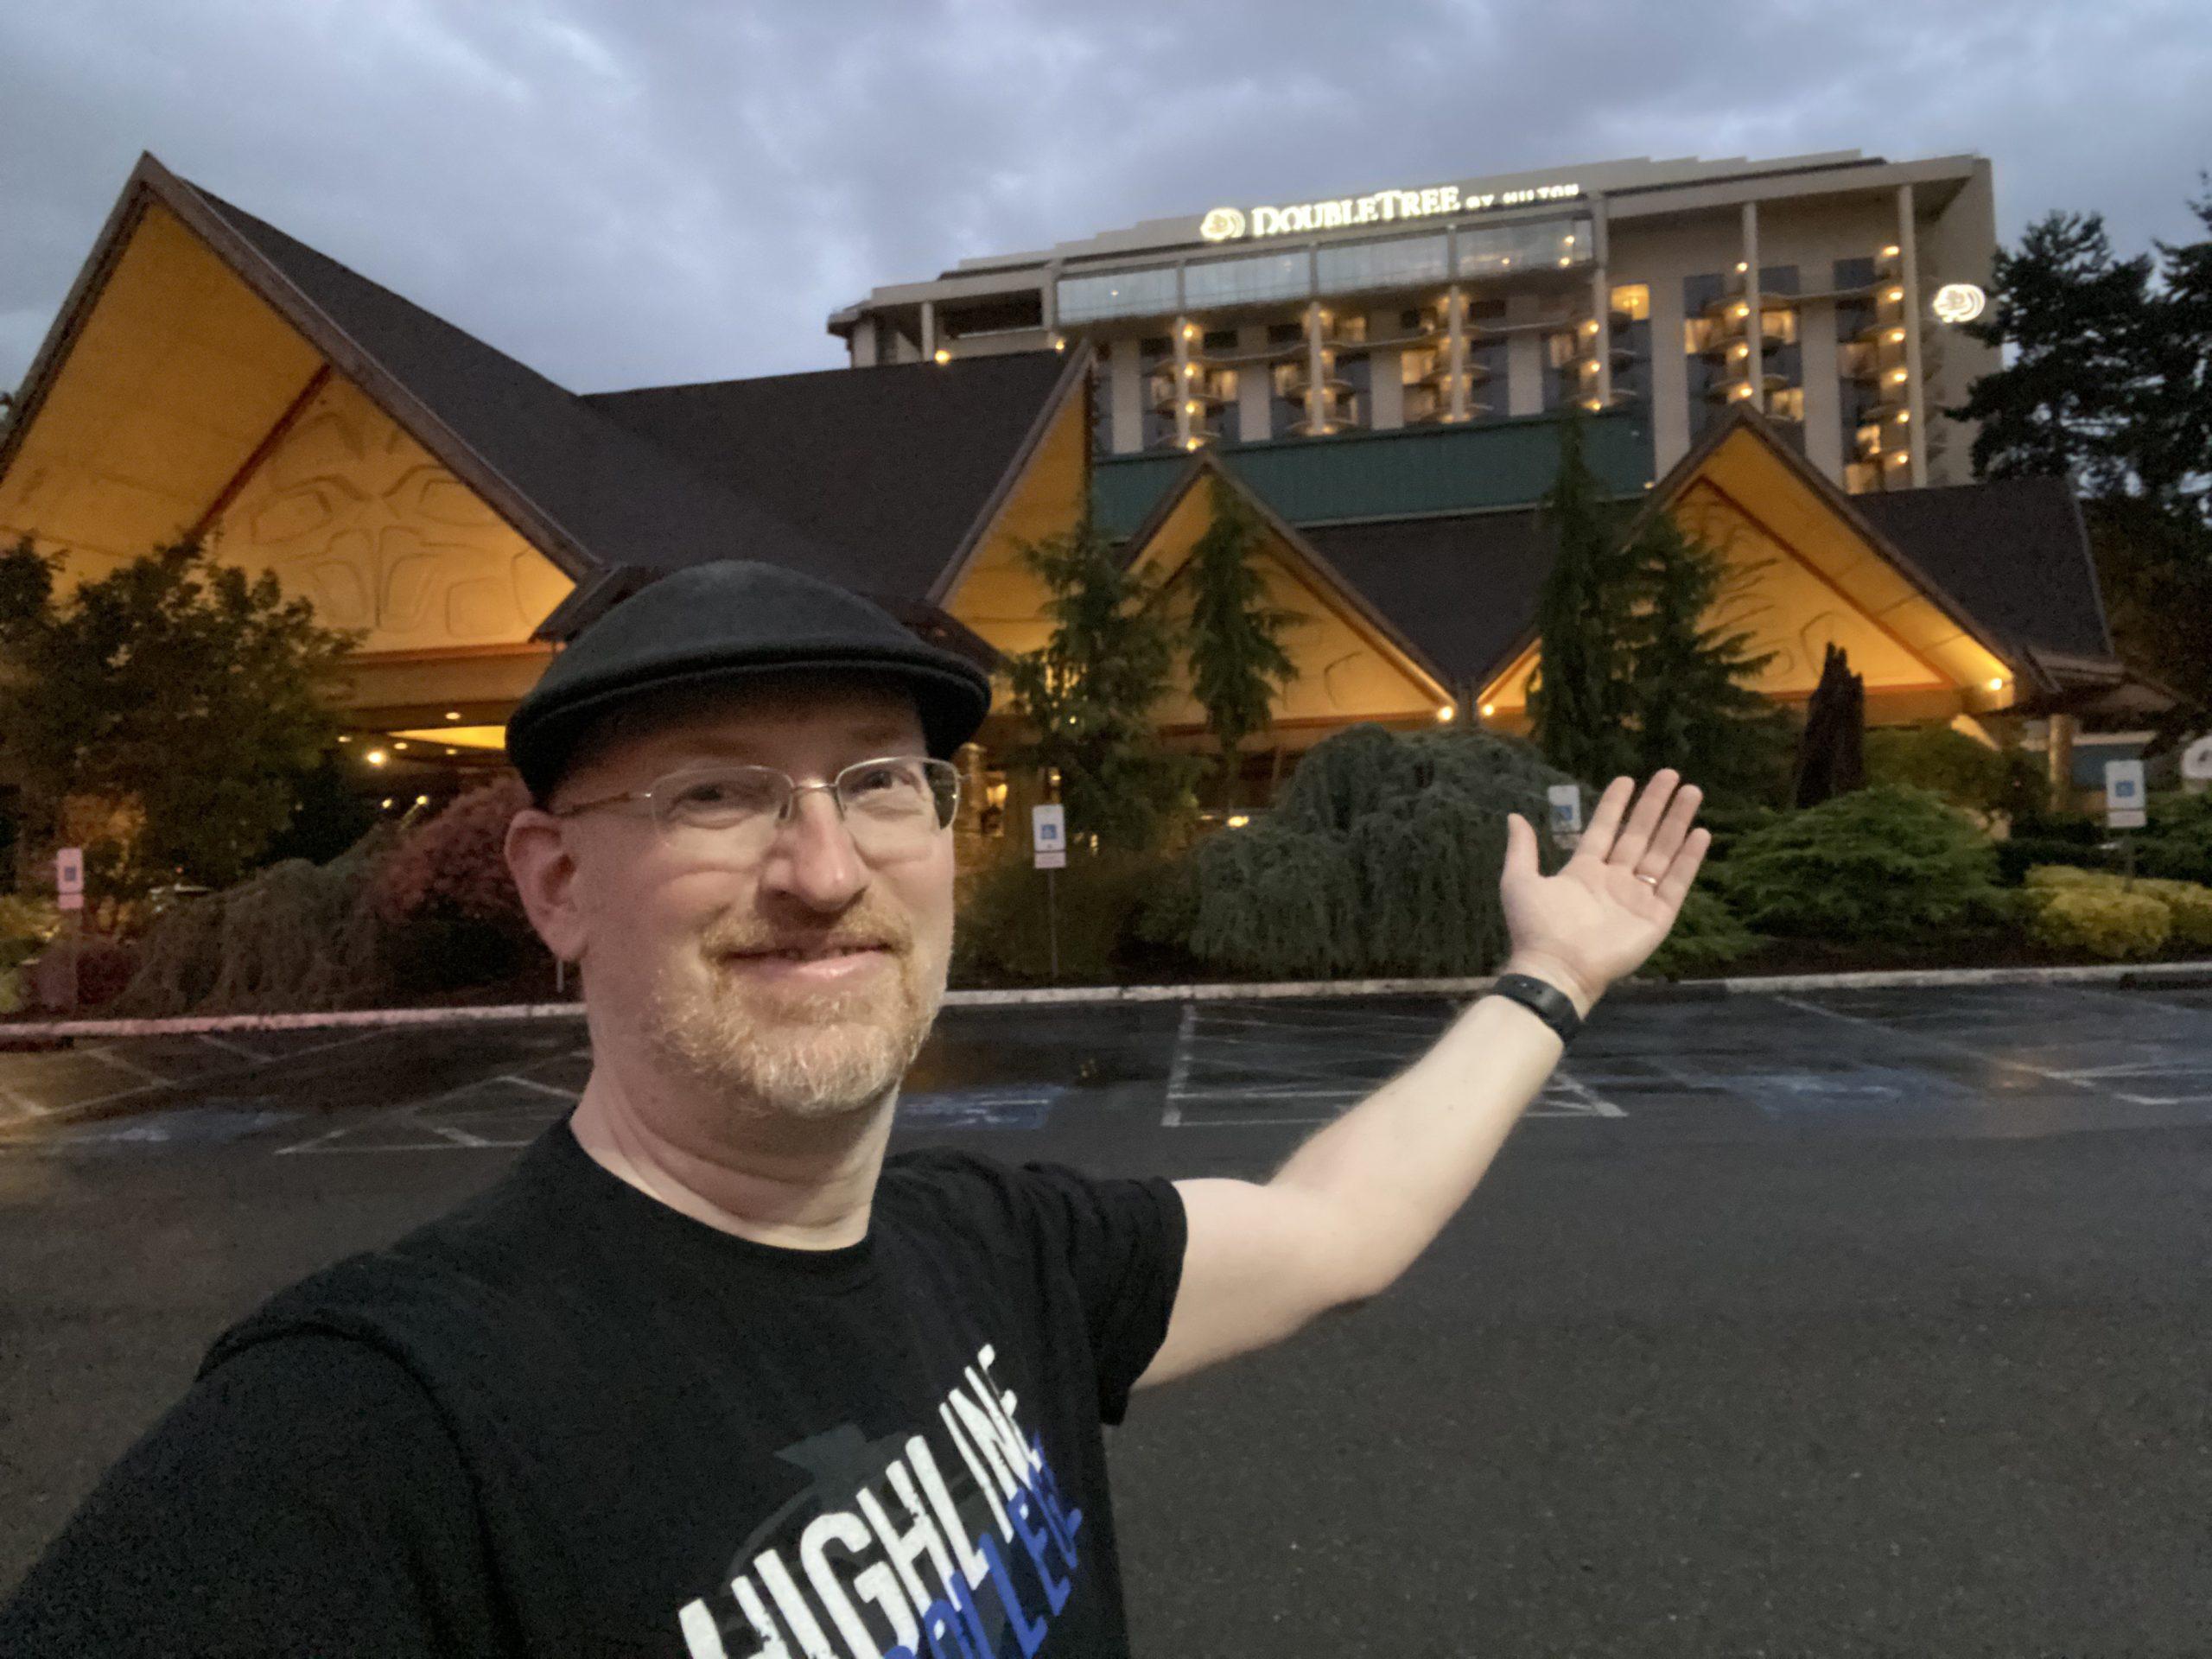 Me in front of the DoubleTree Hotel in SeaTac.